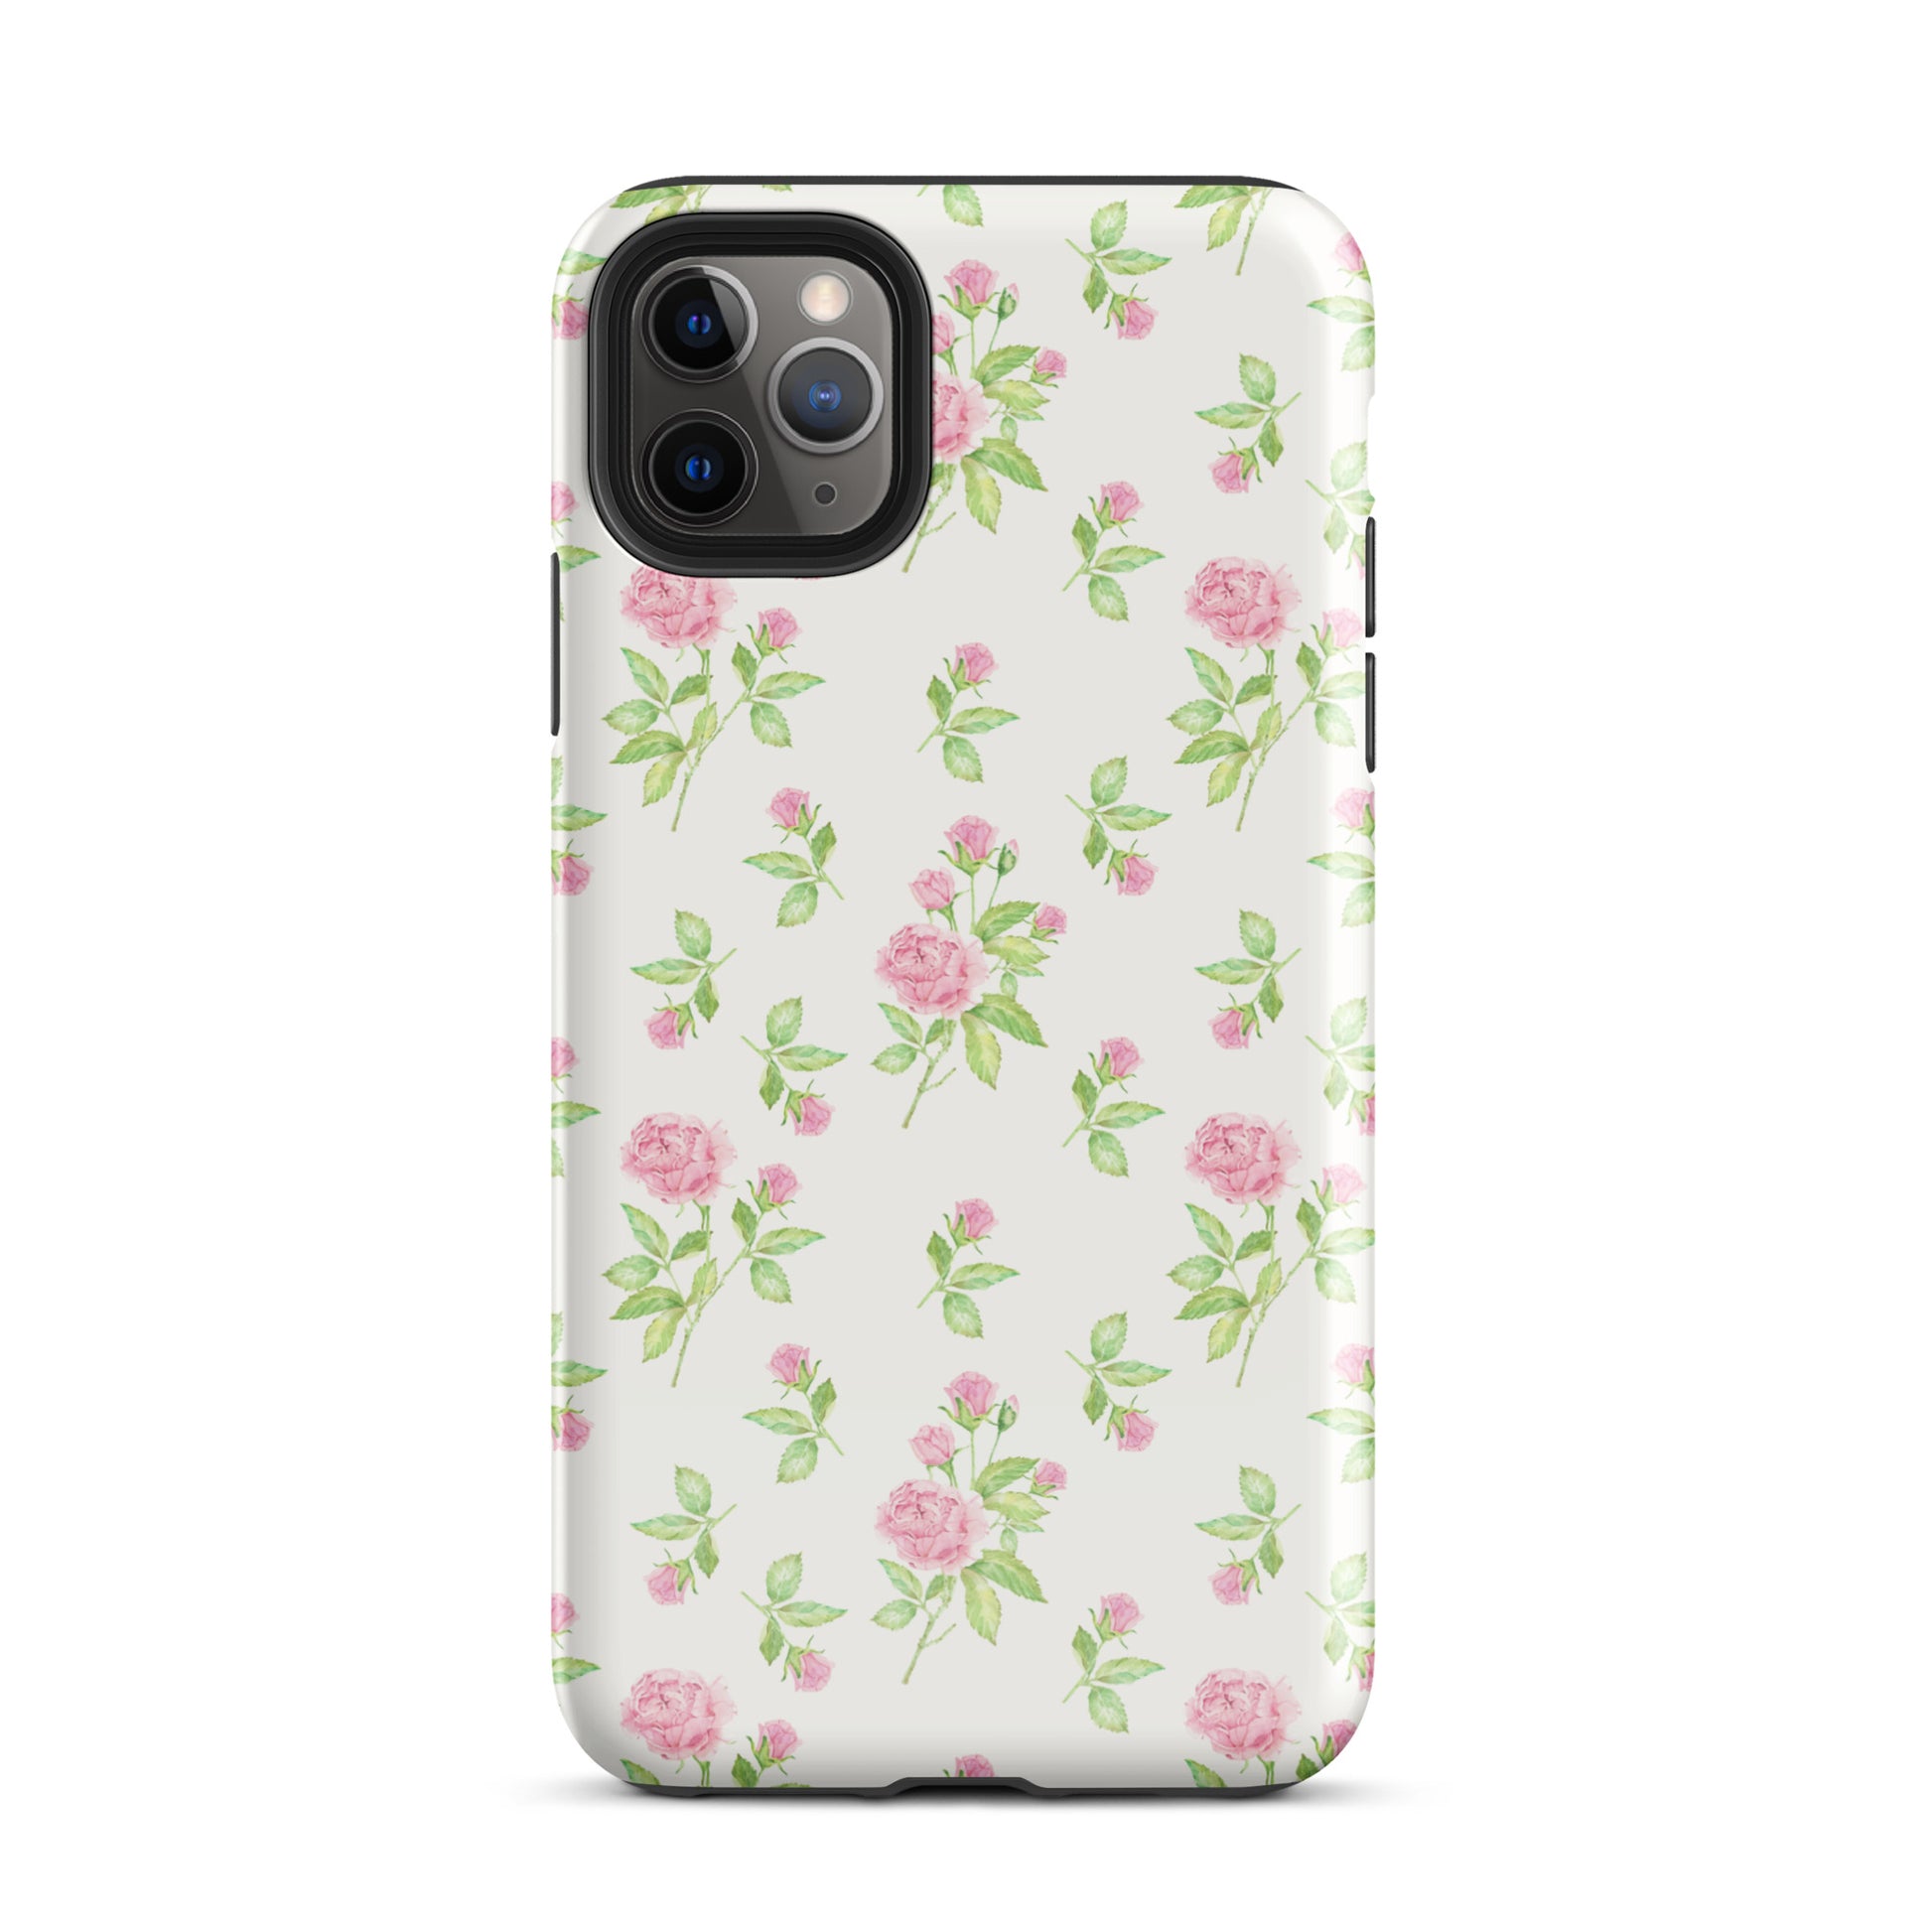 Vintage Roses iPhone Case iPhone 11 Pro Max Glossy